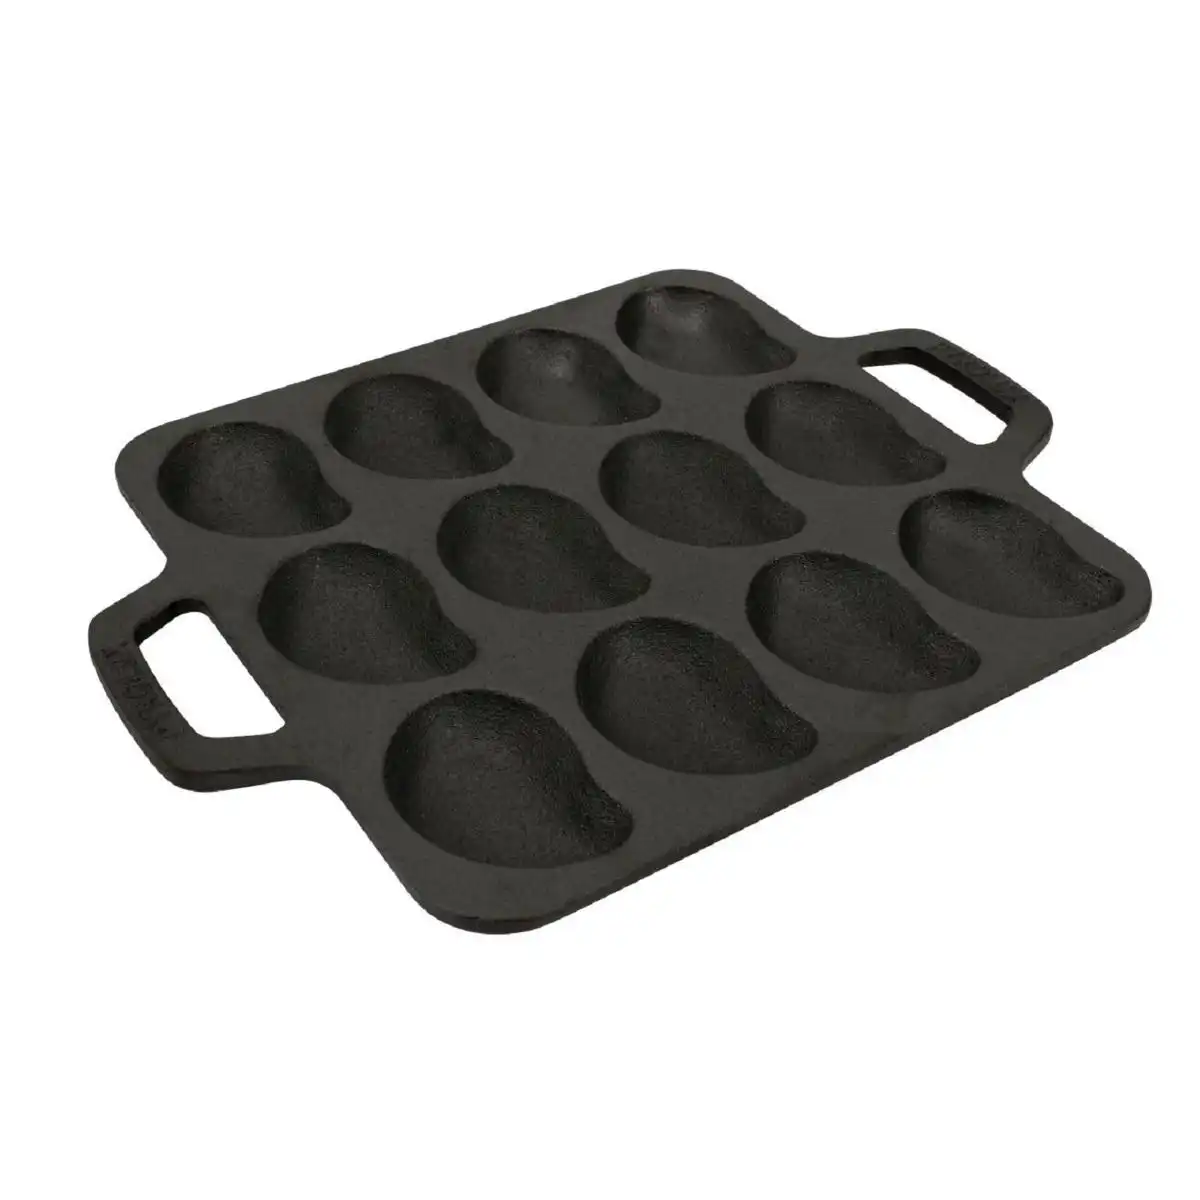 Pyrolux Cast Iron Oyster Pan